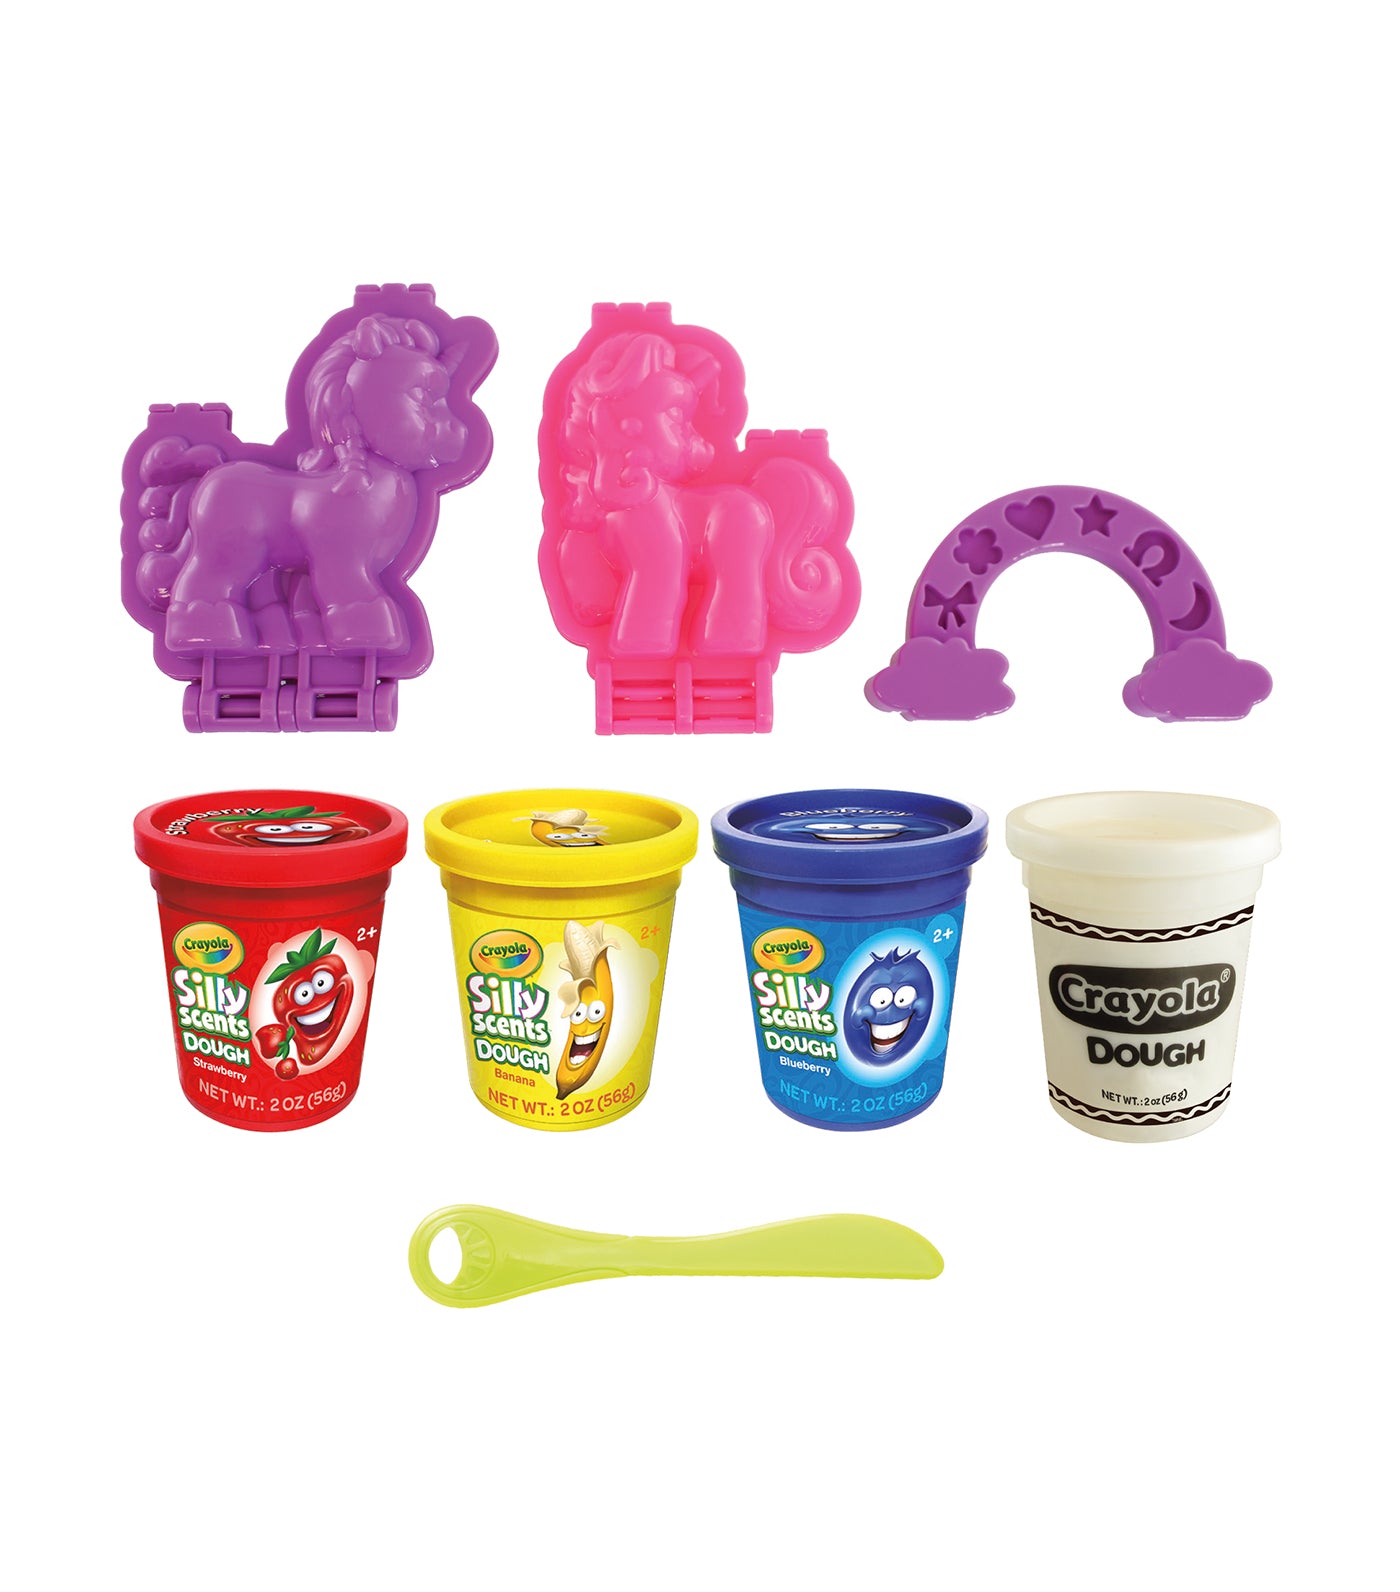 Silly Scents Unicorn Mold n' Play Activity Pack